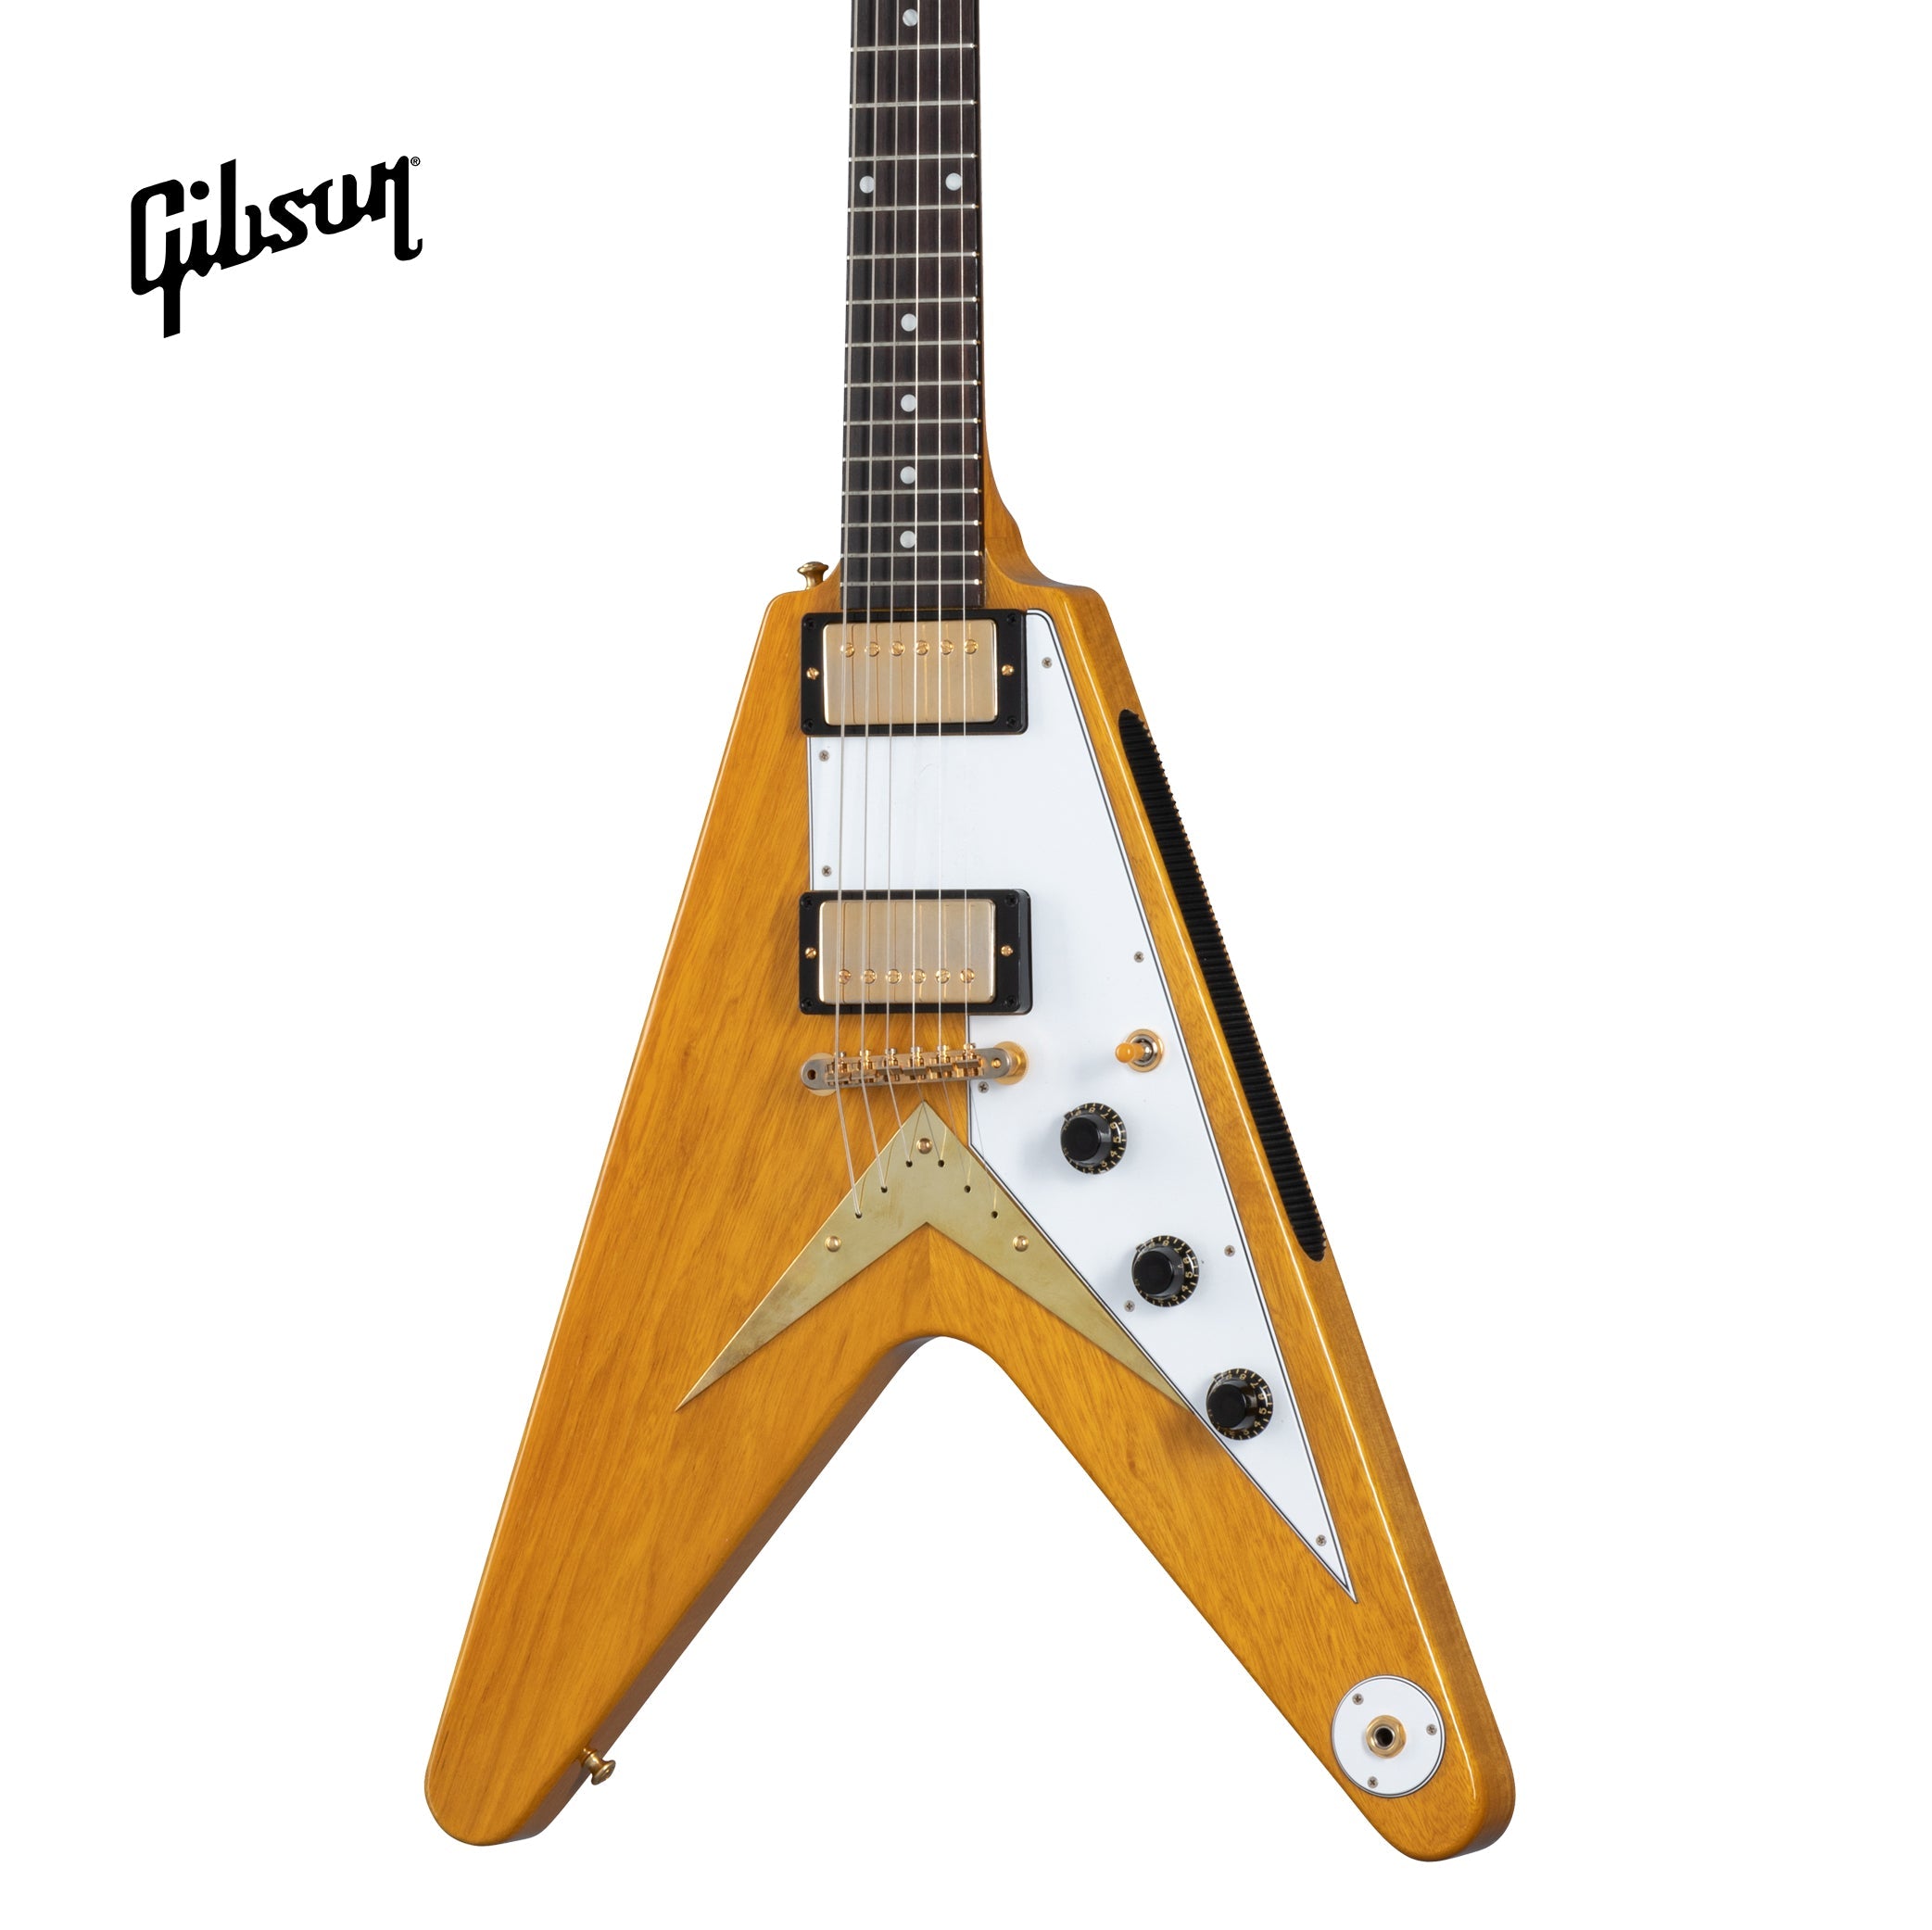 GIBSON 1958 KORINA FLYING V ELECTRIC GUITAR WITH WHITE PICKGUARD - NATURAL